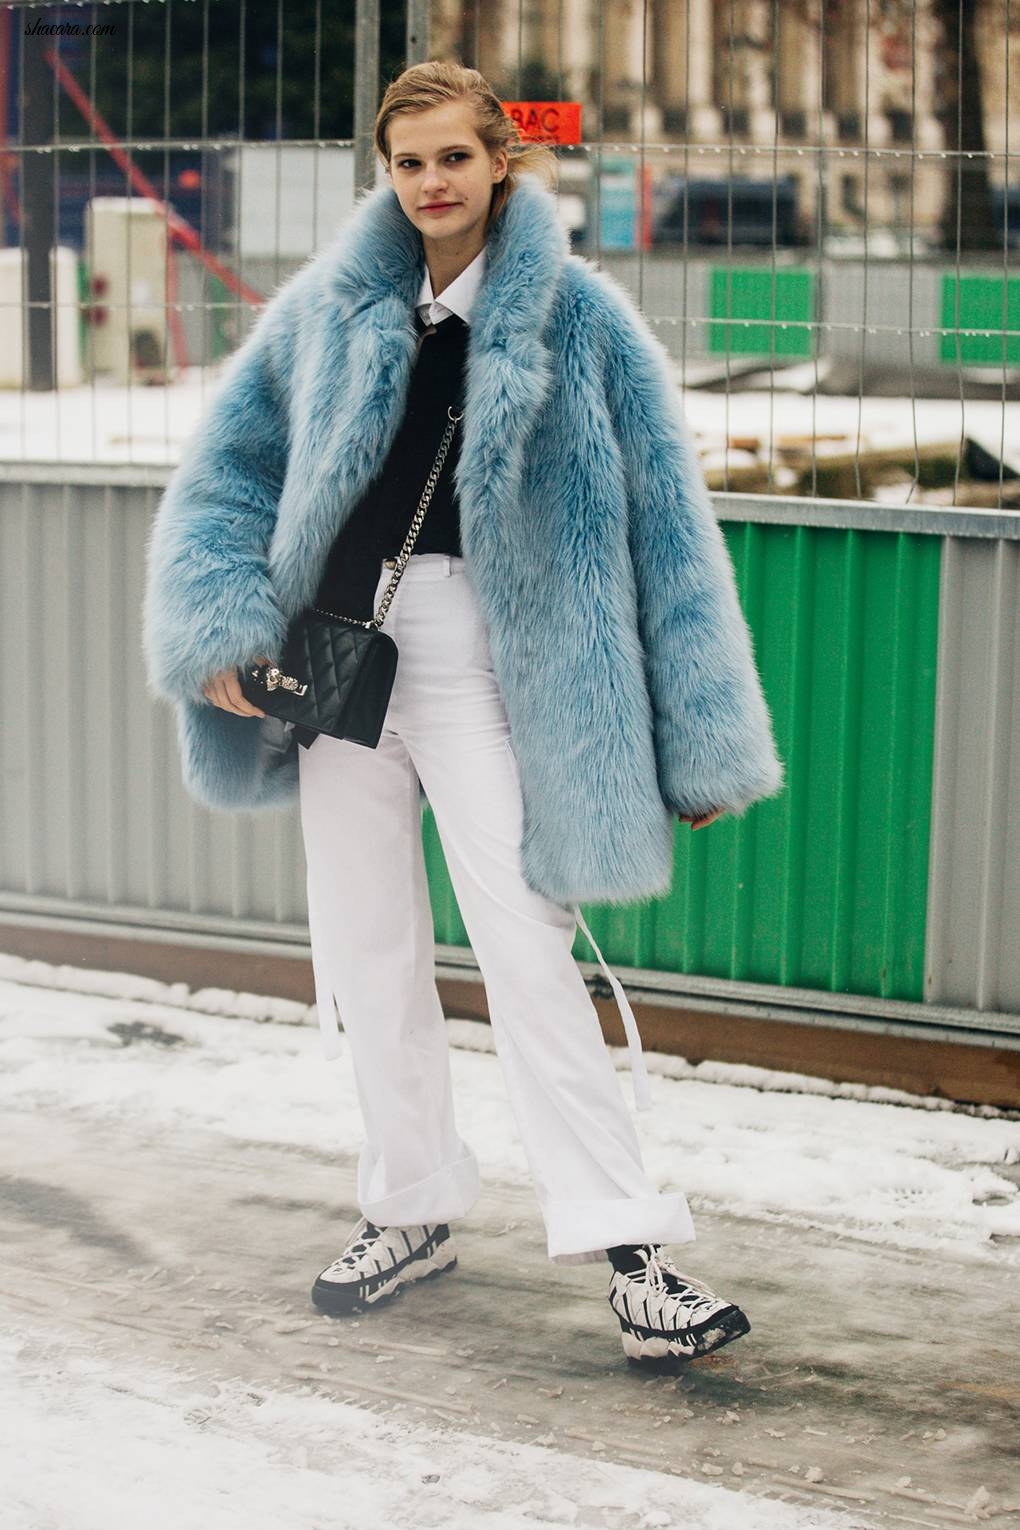 THE BEST STREET STYLE FROM COUTURE FASHION WEEK PART 4